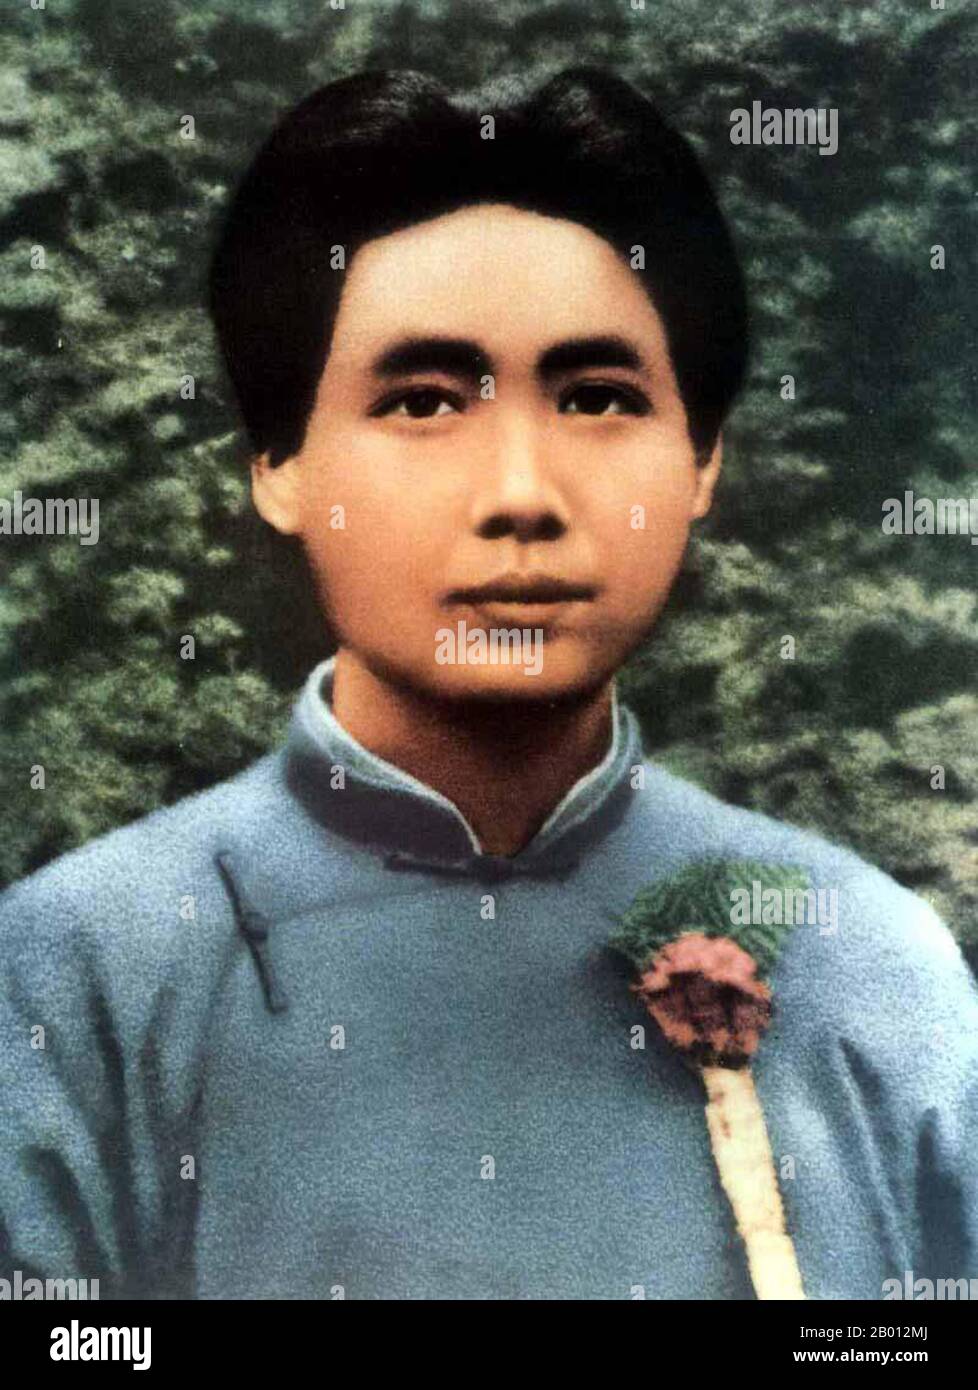 China: Mao Zedong (1893-1976) in Shanghai, 1924.  Mao Zedong, also spelt Mao Tse-tung (26 December 1893  – 9 September 1976), was a Chinese communist revolutionary, guerrilla warfare strategist, author, political theorist, and leader of the Chinese Revolution. Commonly referred to as Chairman Mao, he was the architect of the People's Republic of China (PRC) from its establishment in 1949, and held authoritarian control over the nation until his death in 1976. His theoretical contribution to Marxism-Leninism, along with his military strategies and political policies, are known as Maoism. Stock Photo